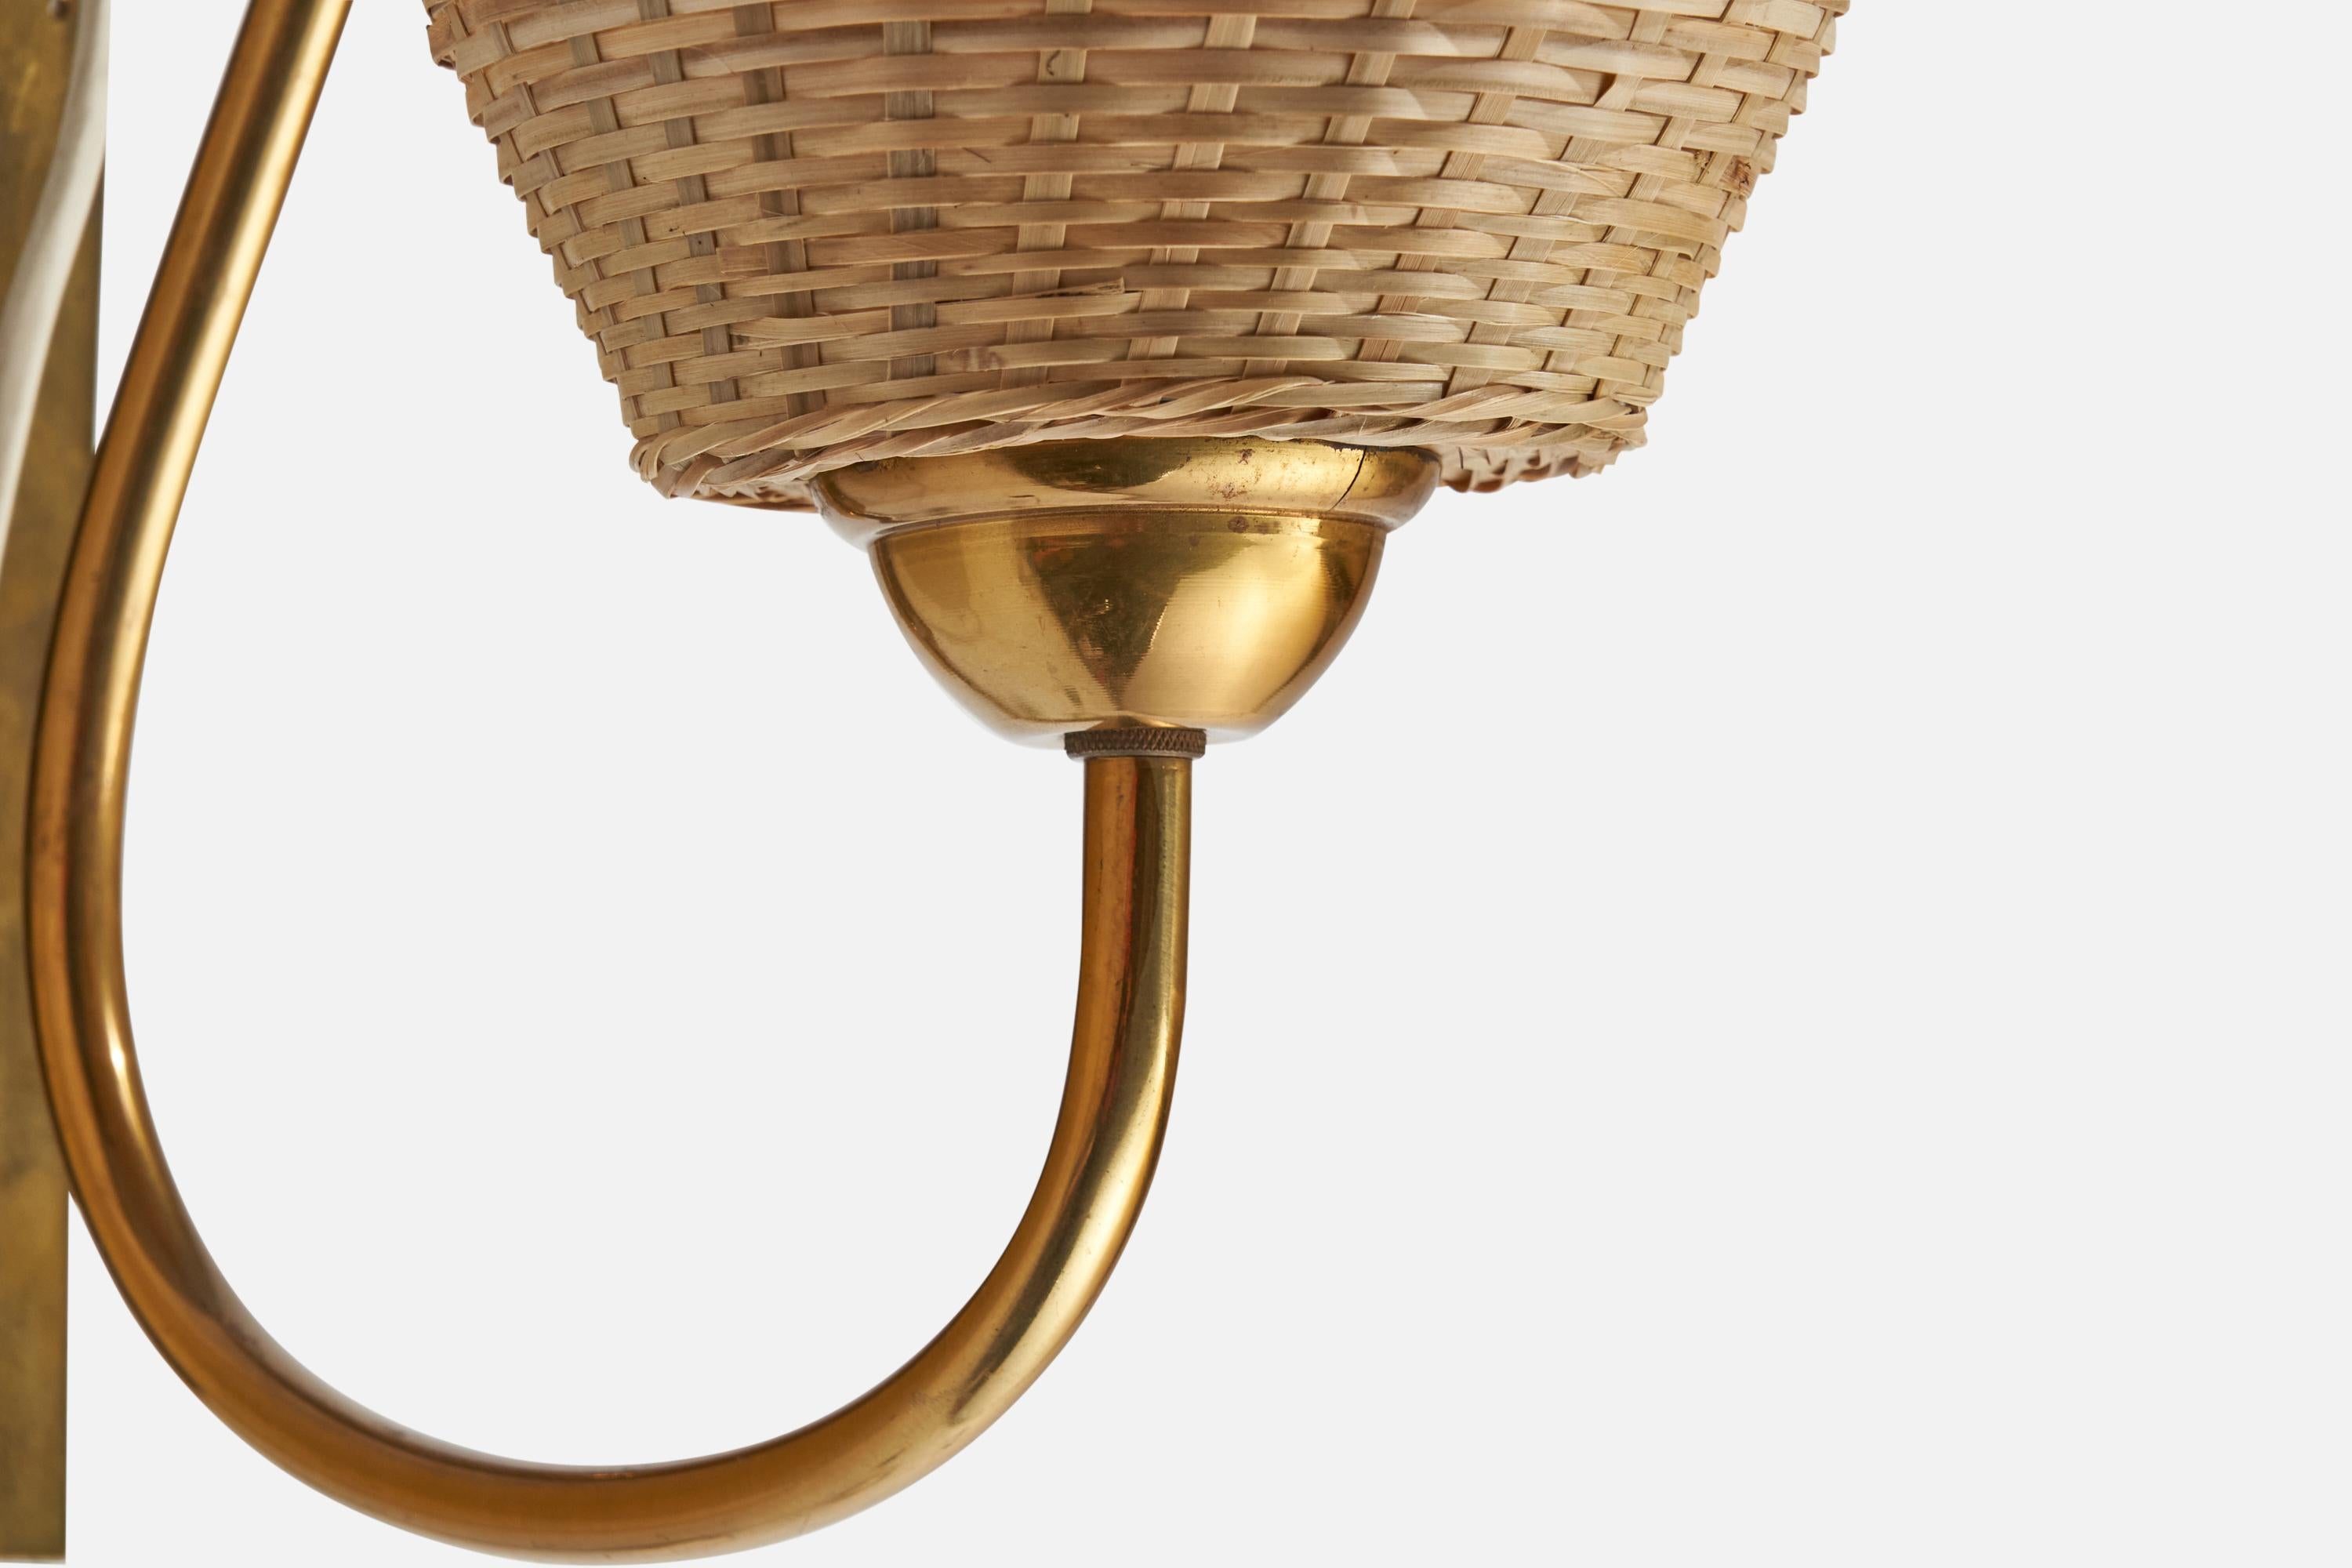 A brass and rattan wall light designed and produced in Sweden, 1940s.

Please note cord feeds from bottom of stem, configured for plug in.

Overall Dimensions (inches): 12” H x 7.5” W x 17.75” D
Back Plate Dimensions (inches): 8.8” H x 2.1” W x